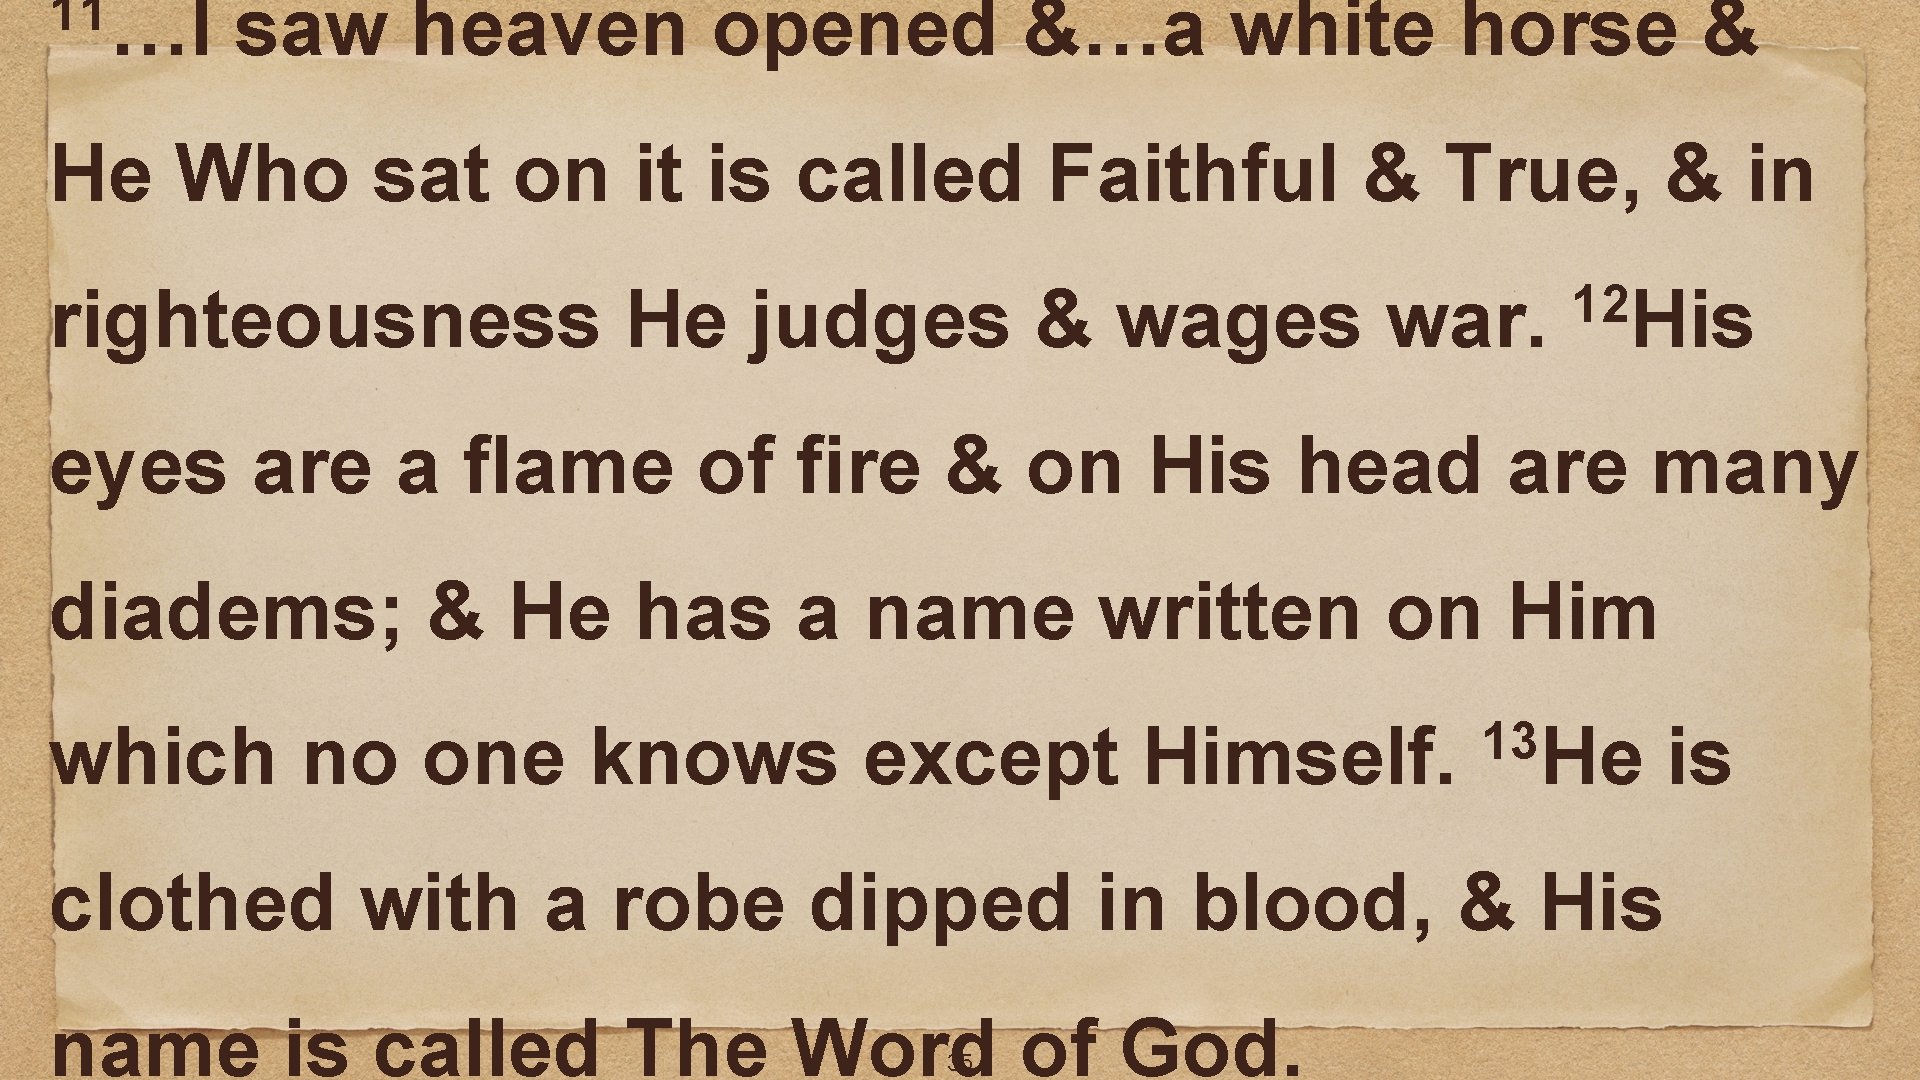 11…I saw heaven opened &…a white horse & He Who sat on it is